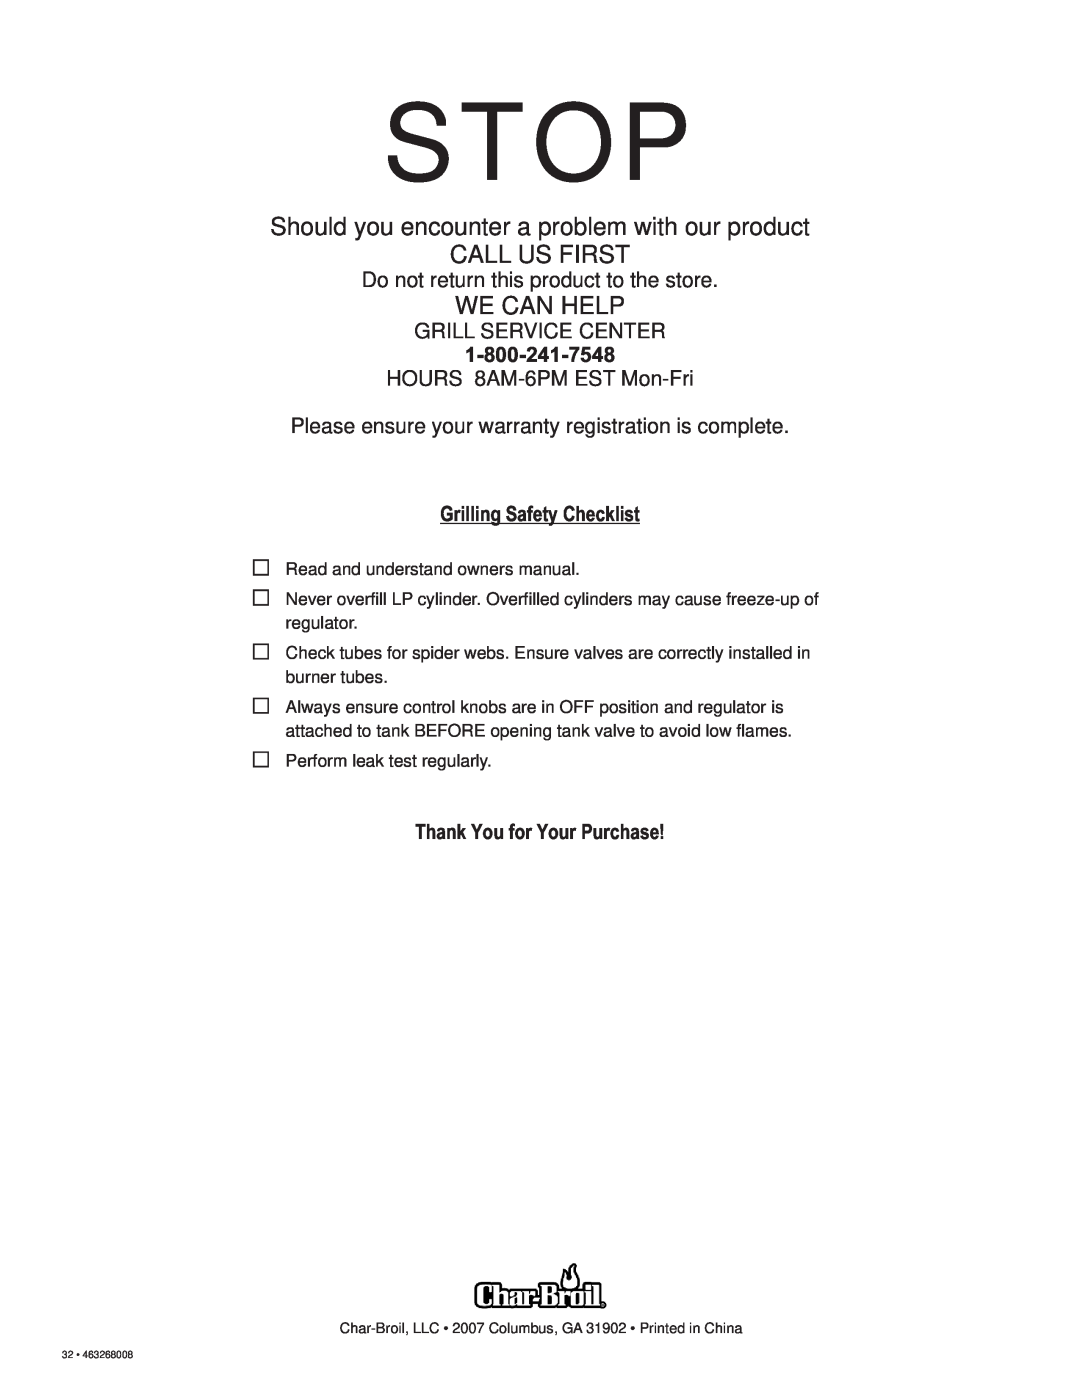 Char-Broil 463268008 manual Grilling Safety Checklist, Thank You for Your Purchase, Stop, We Can Help 